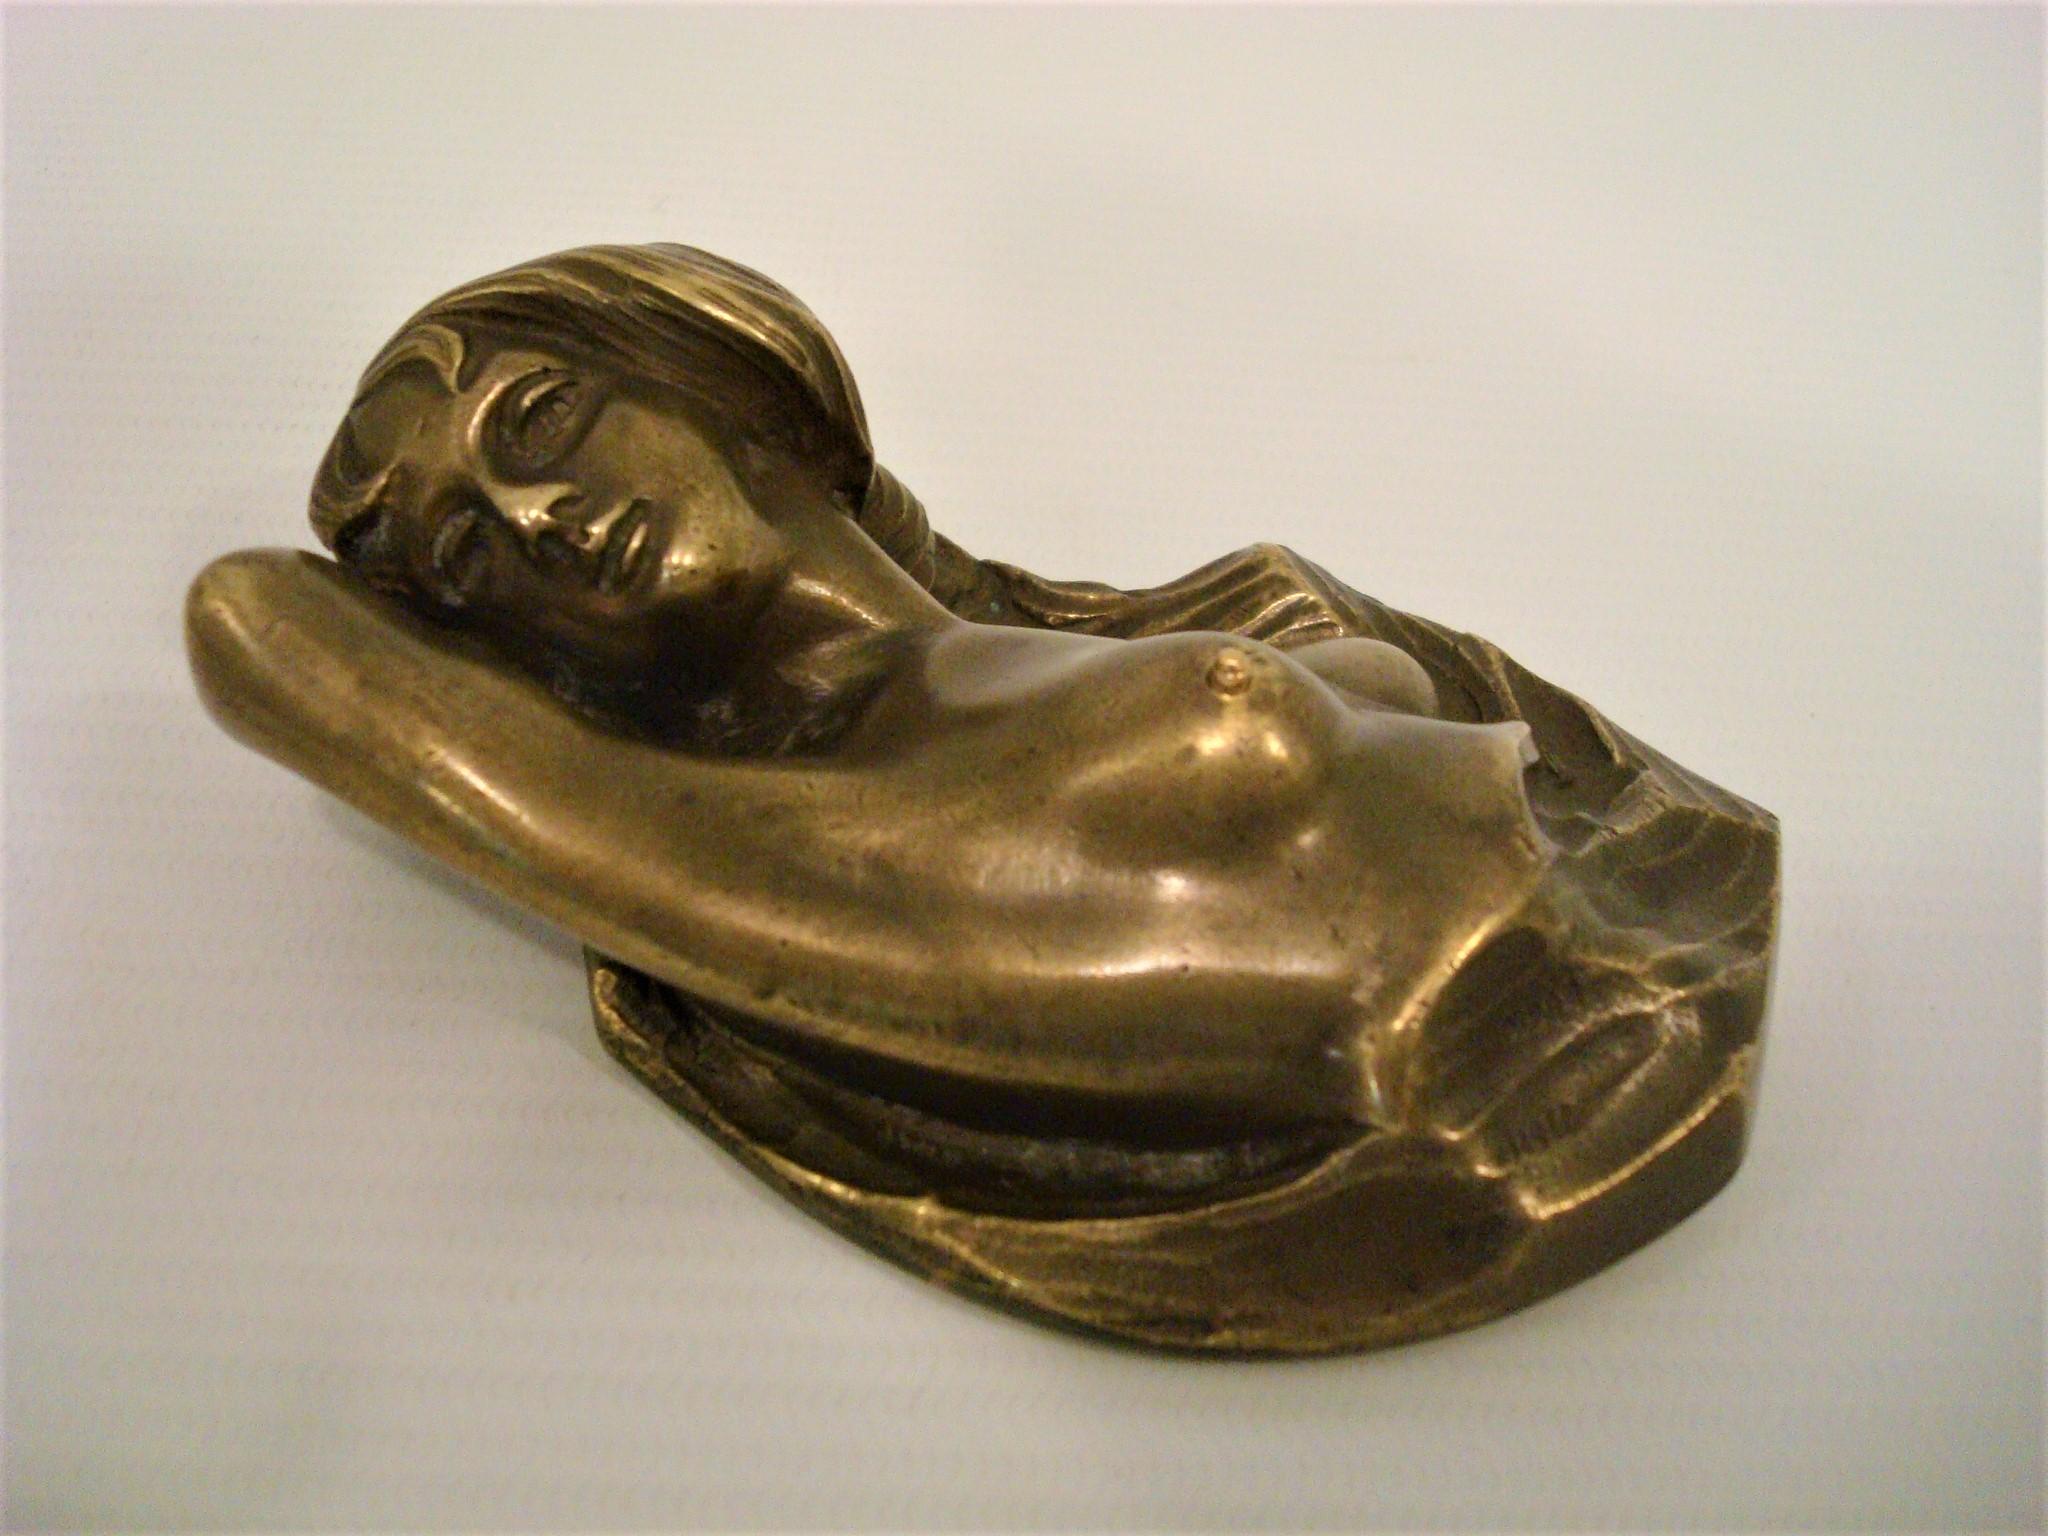 Erotic / nude women bronze sculpture table bell push - Austria 1900´s
Talk about hard to find items! This impossible to believe bell push is the only erotic bell push we have ever seen. Normally you get a little boy, or an animal, but not here. You